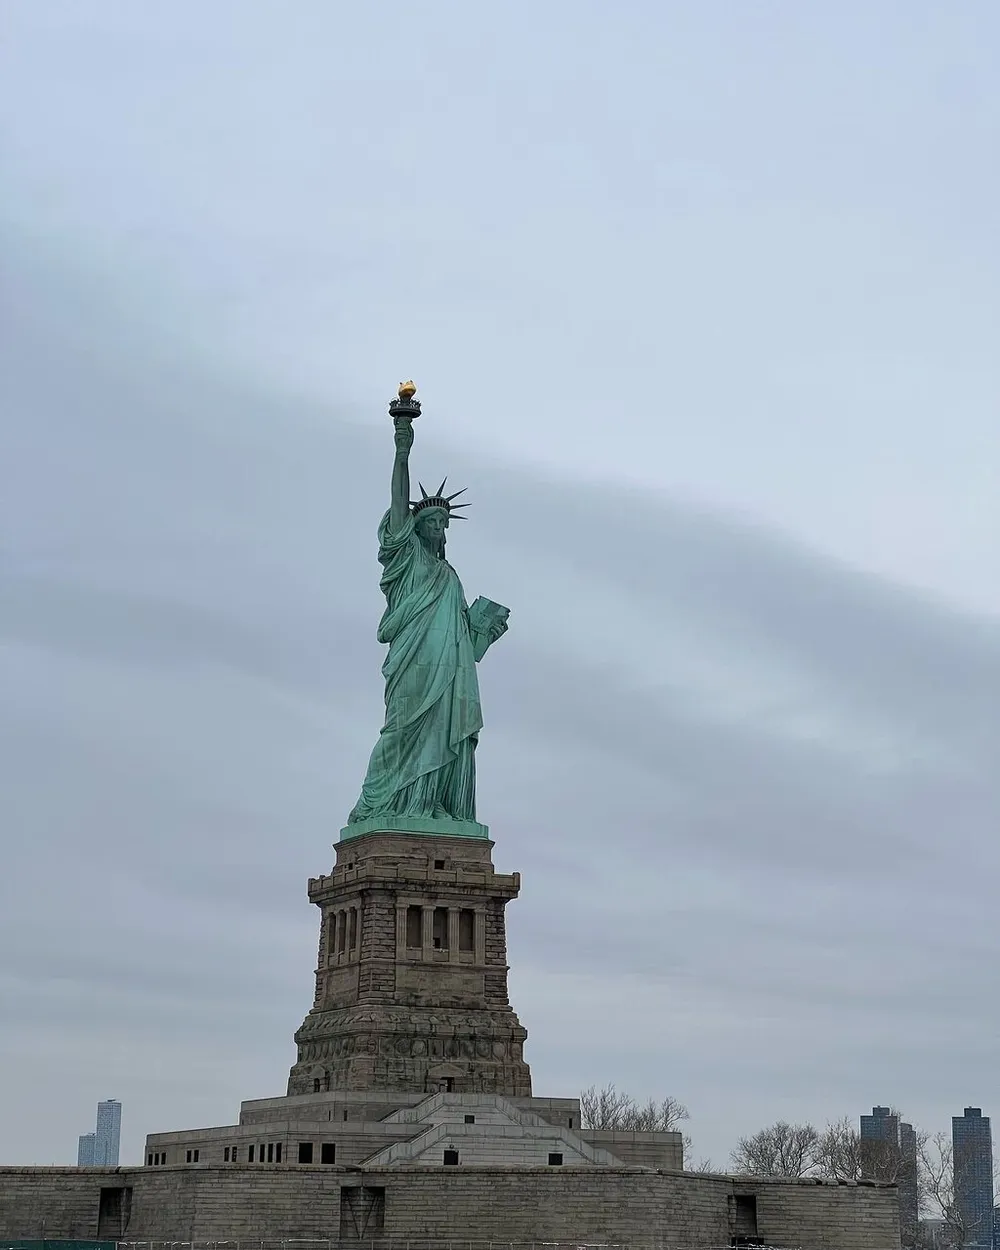 The image shows the Statue of Liberty standing tall against a cloudy sky